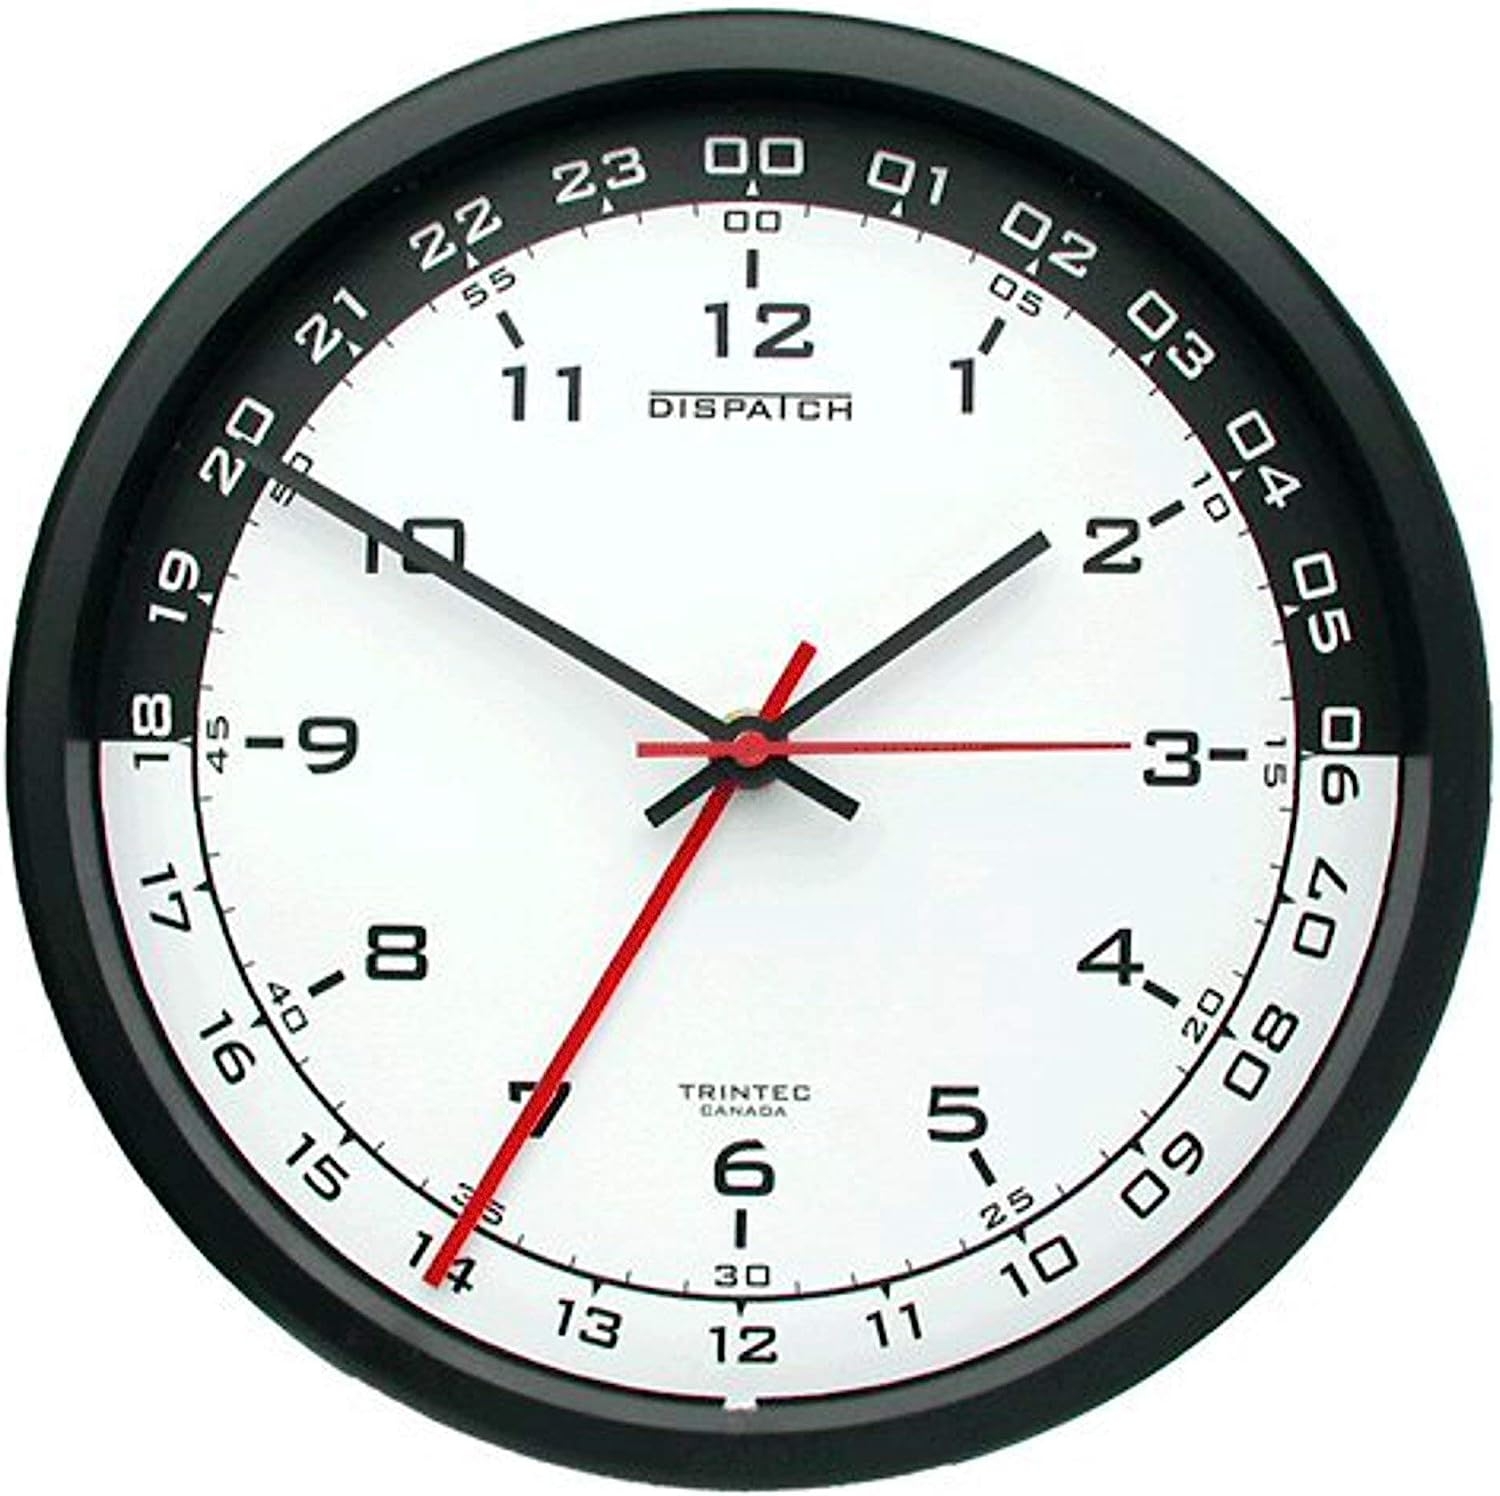 Trintec 12 & 24 Hour Military Time Swl Zulu Time 24hr Wall Clock 10″ – White Dial with Black Moon DSP03   price checker  